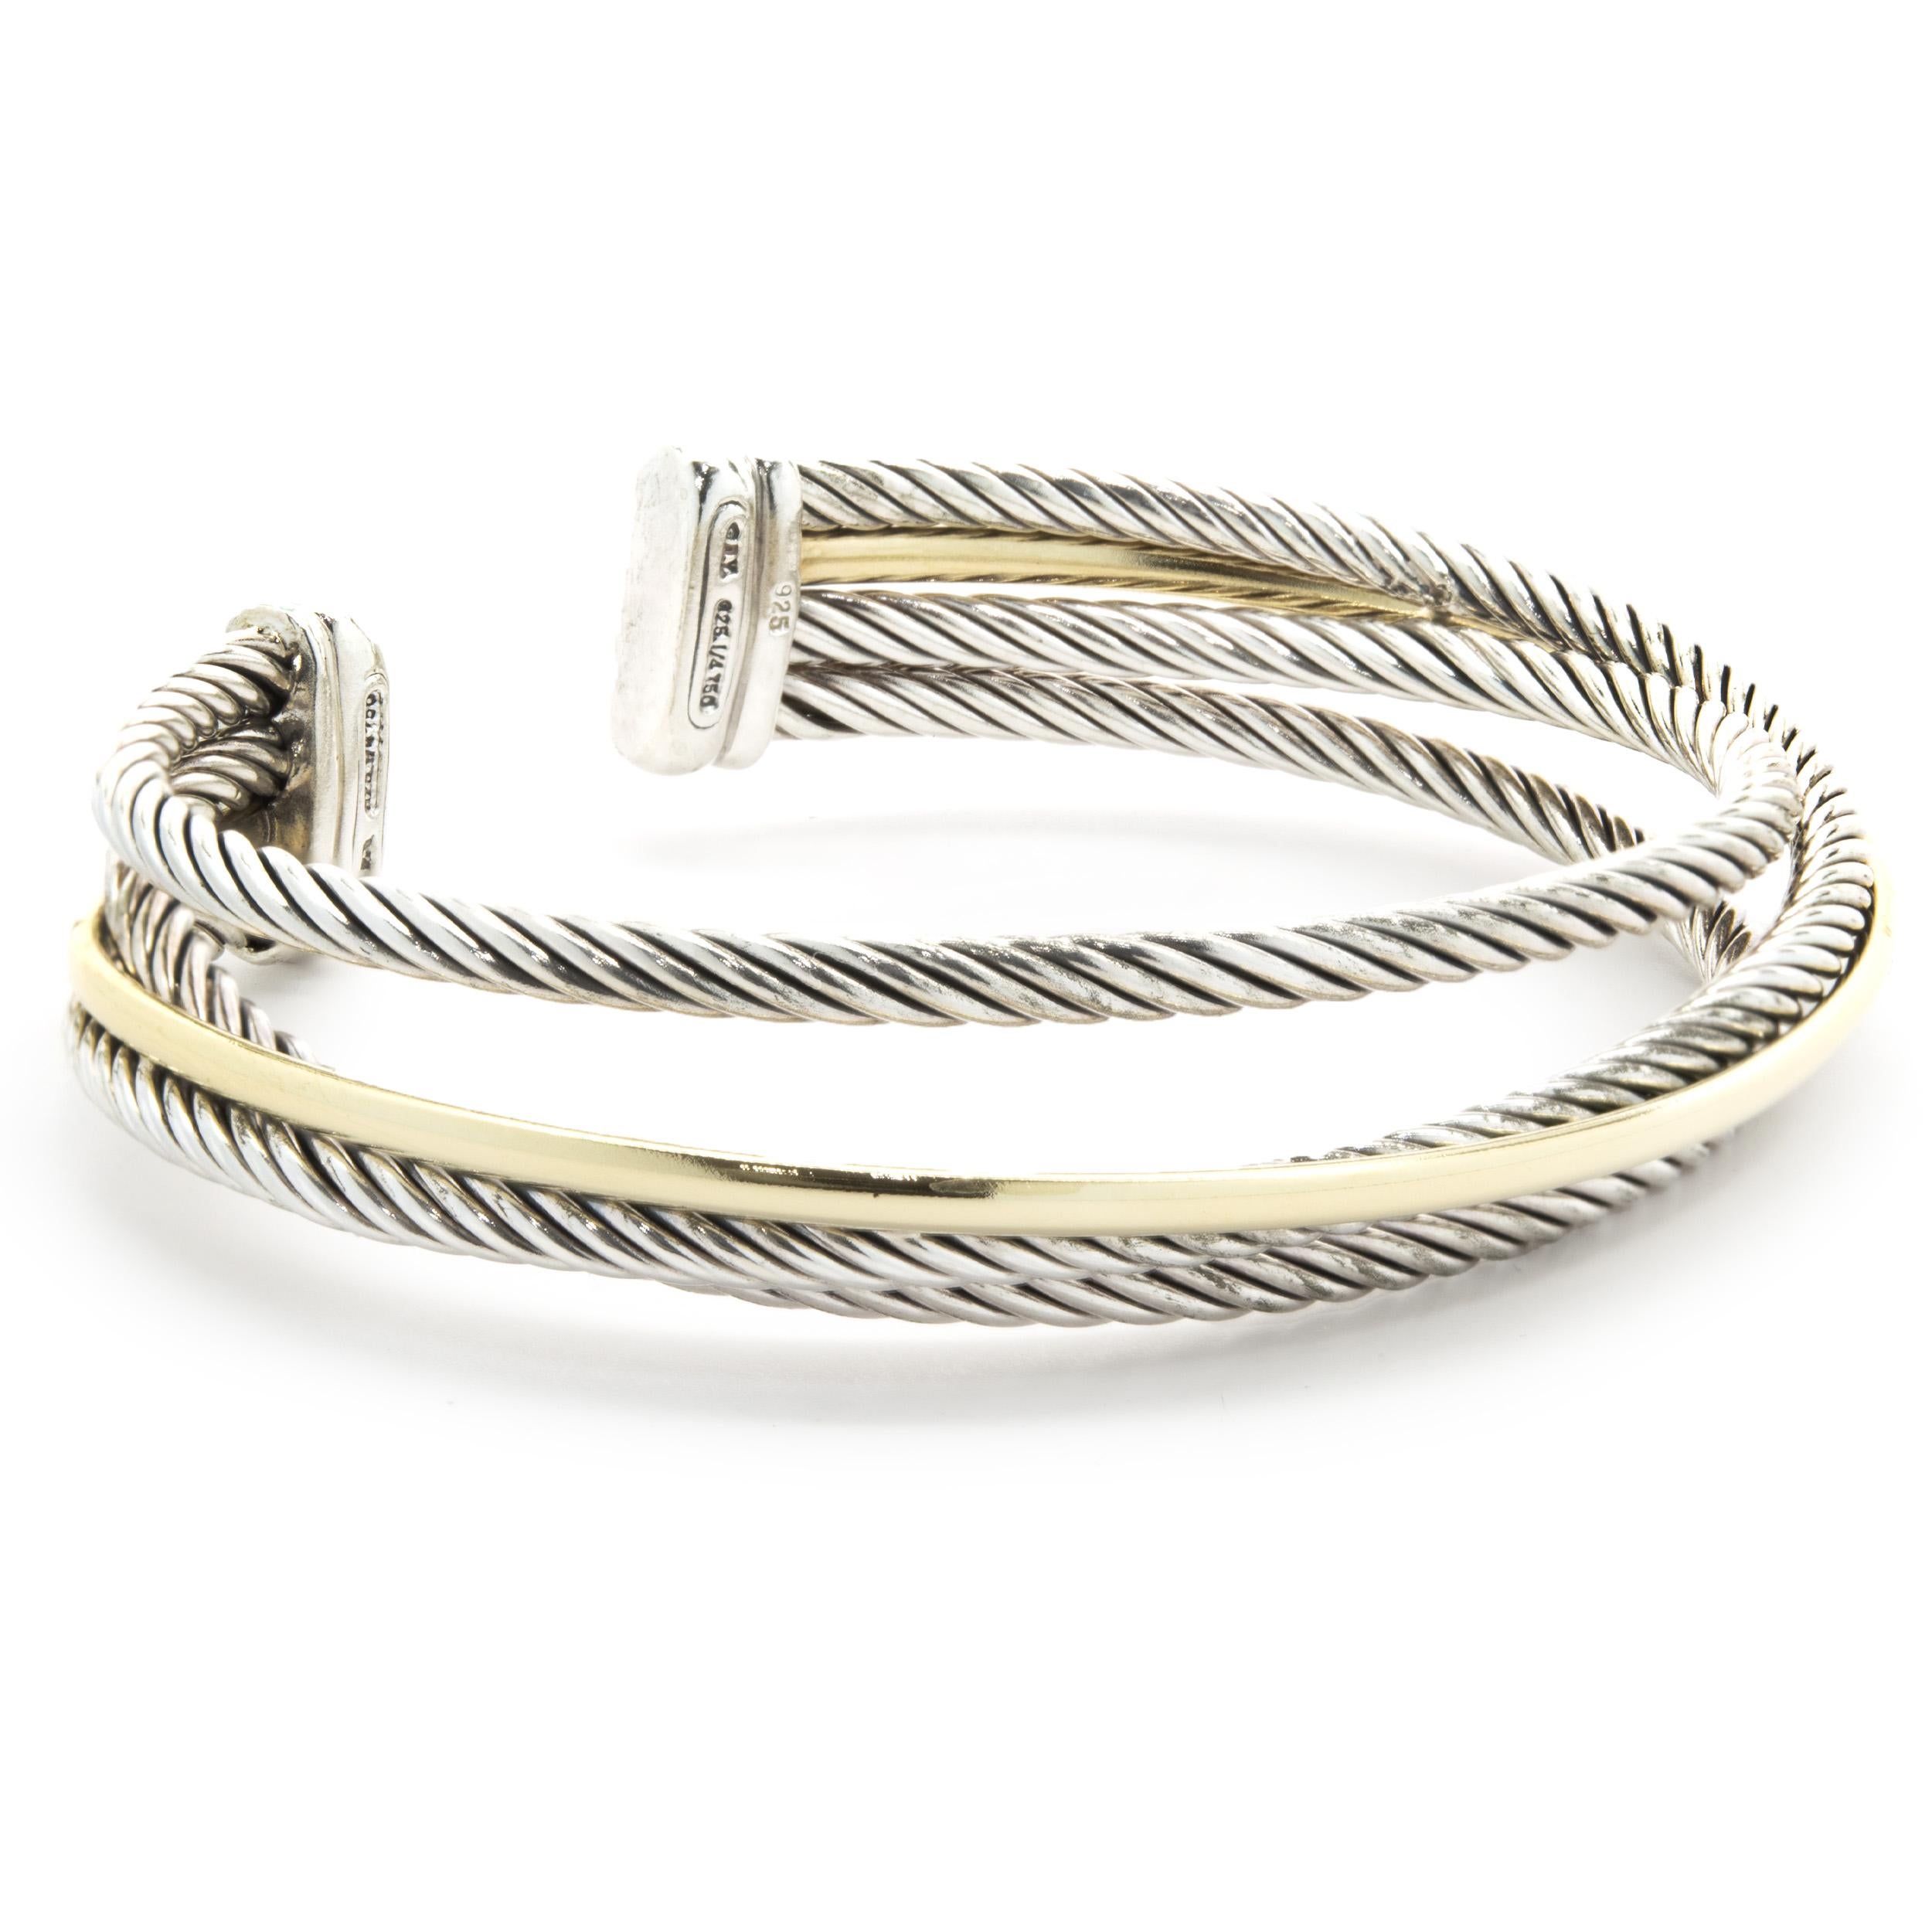 Designer: David Yurman
Material: sterling silver / 18K yellow gold
Dimensions: bracelet measures 11.5mm wide, fits up to a 6.5-inch wrist

No box or papers included
Guaranteed authentic by seller
